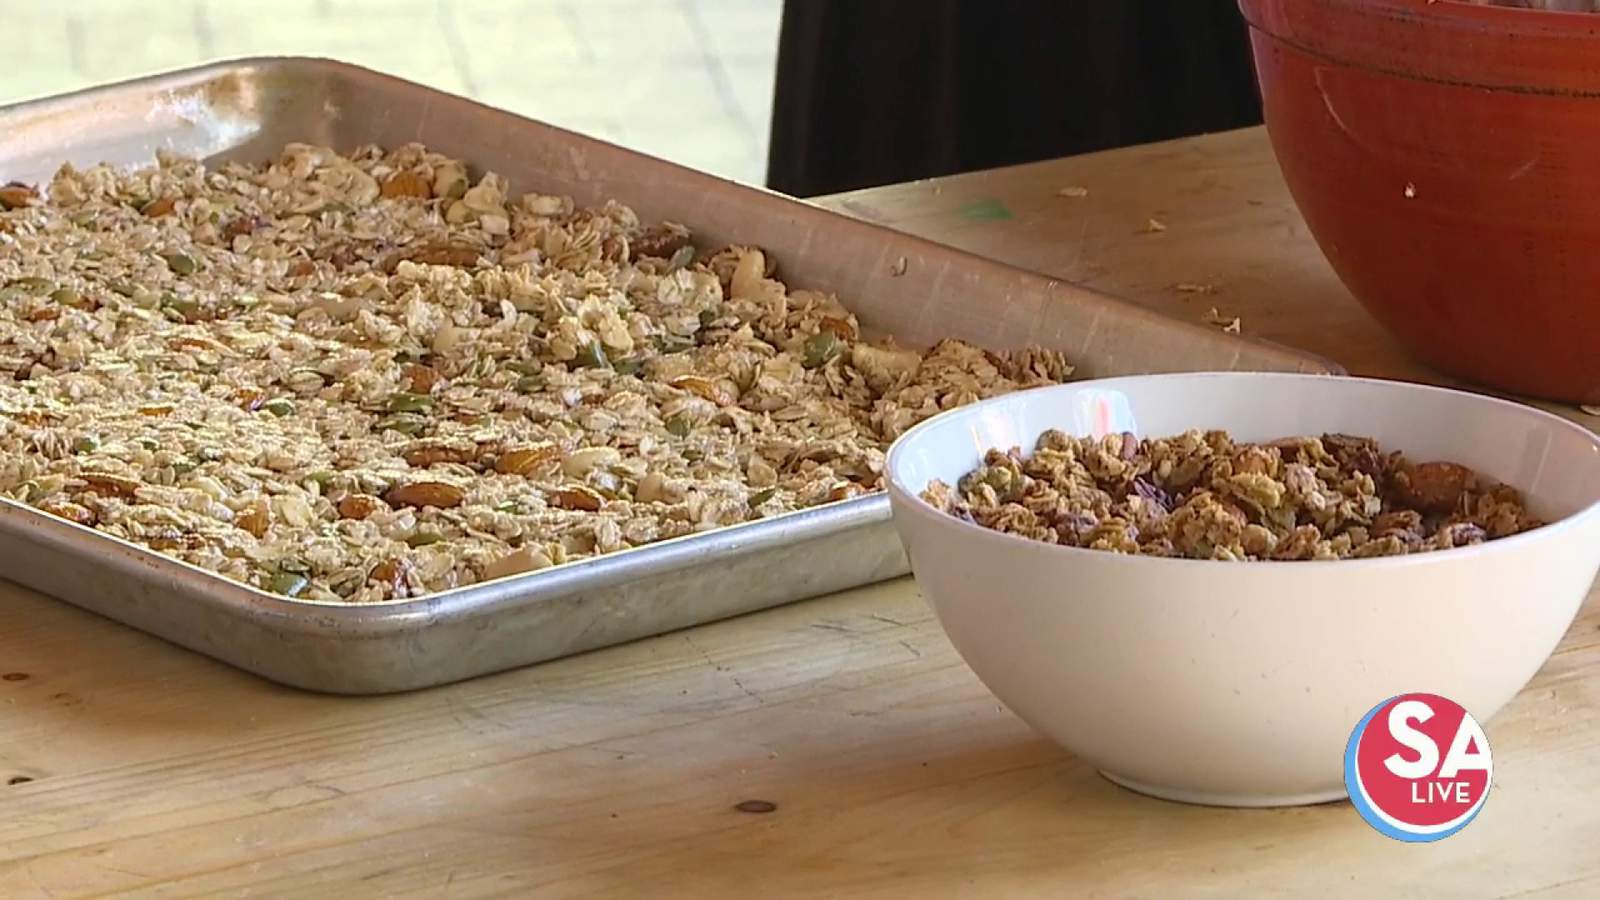 Squirrel-approved! We’re ‘nuts’ about this homemade nutty granola